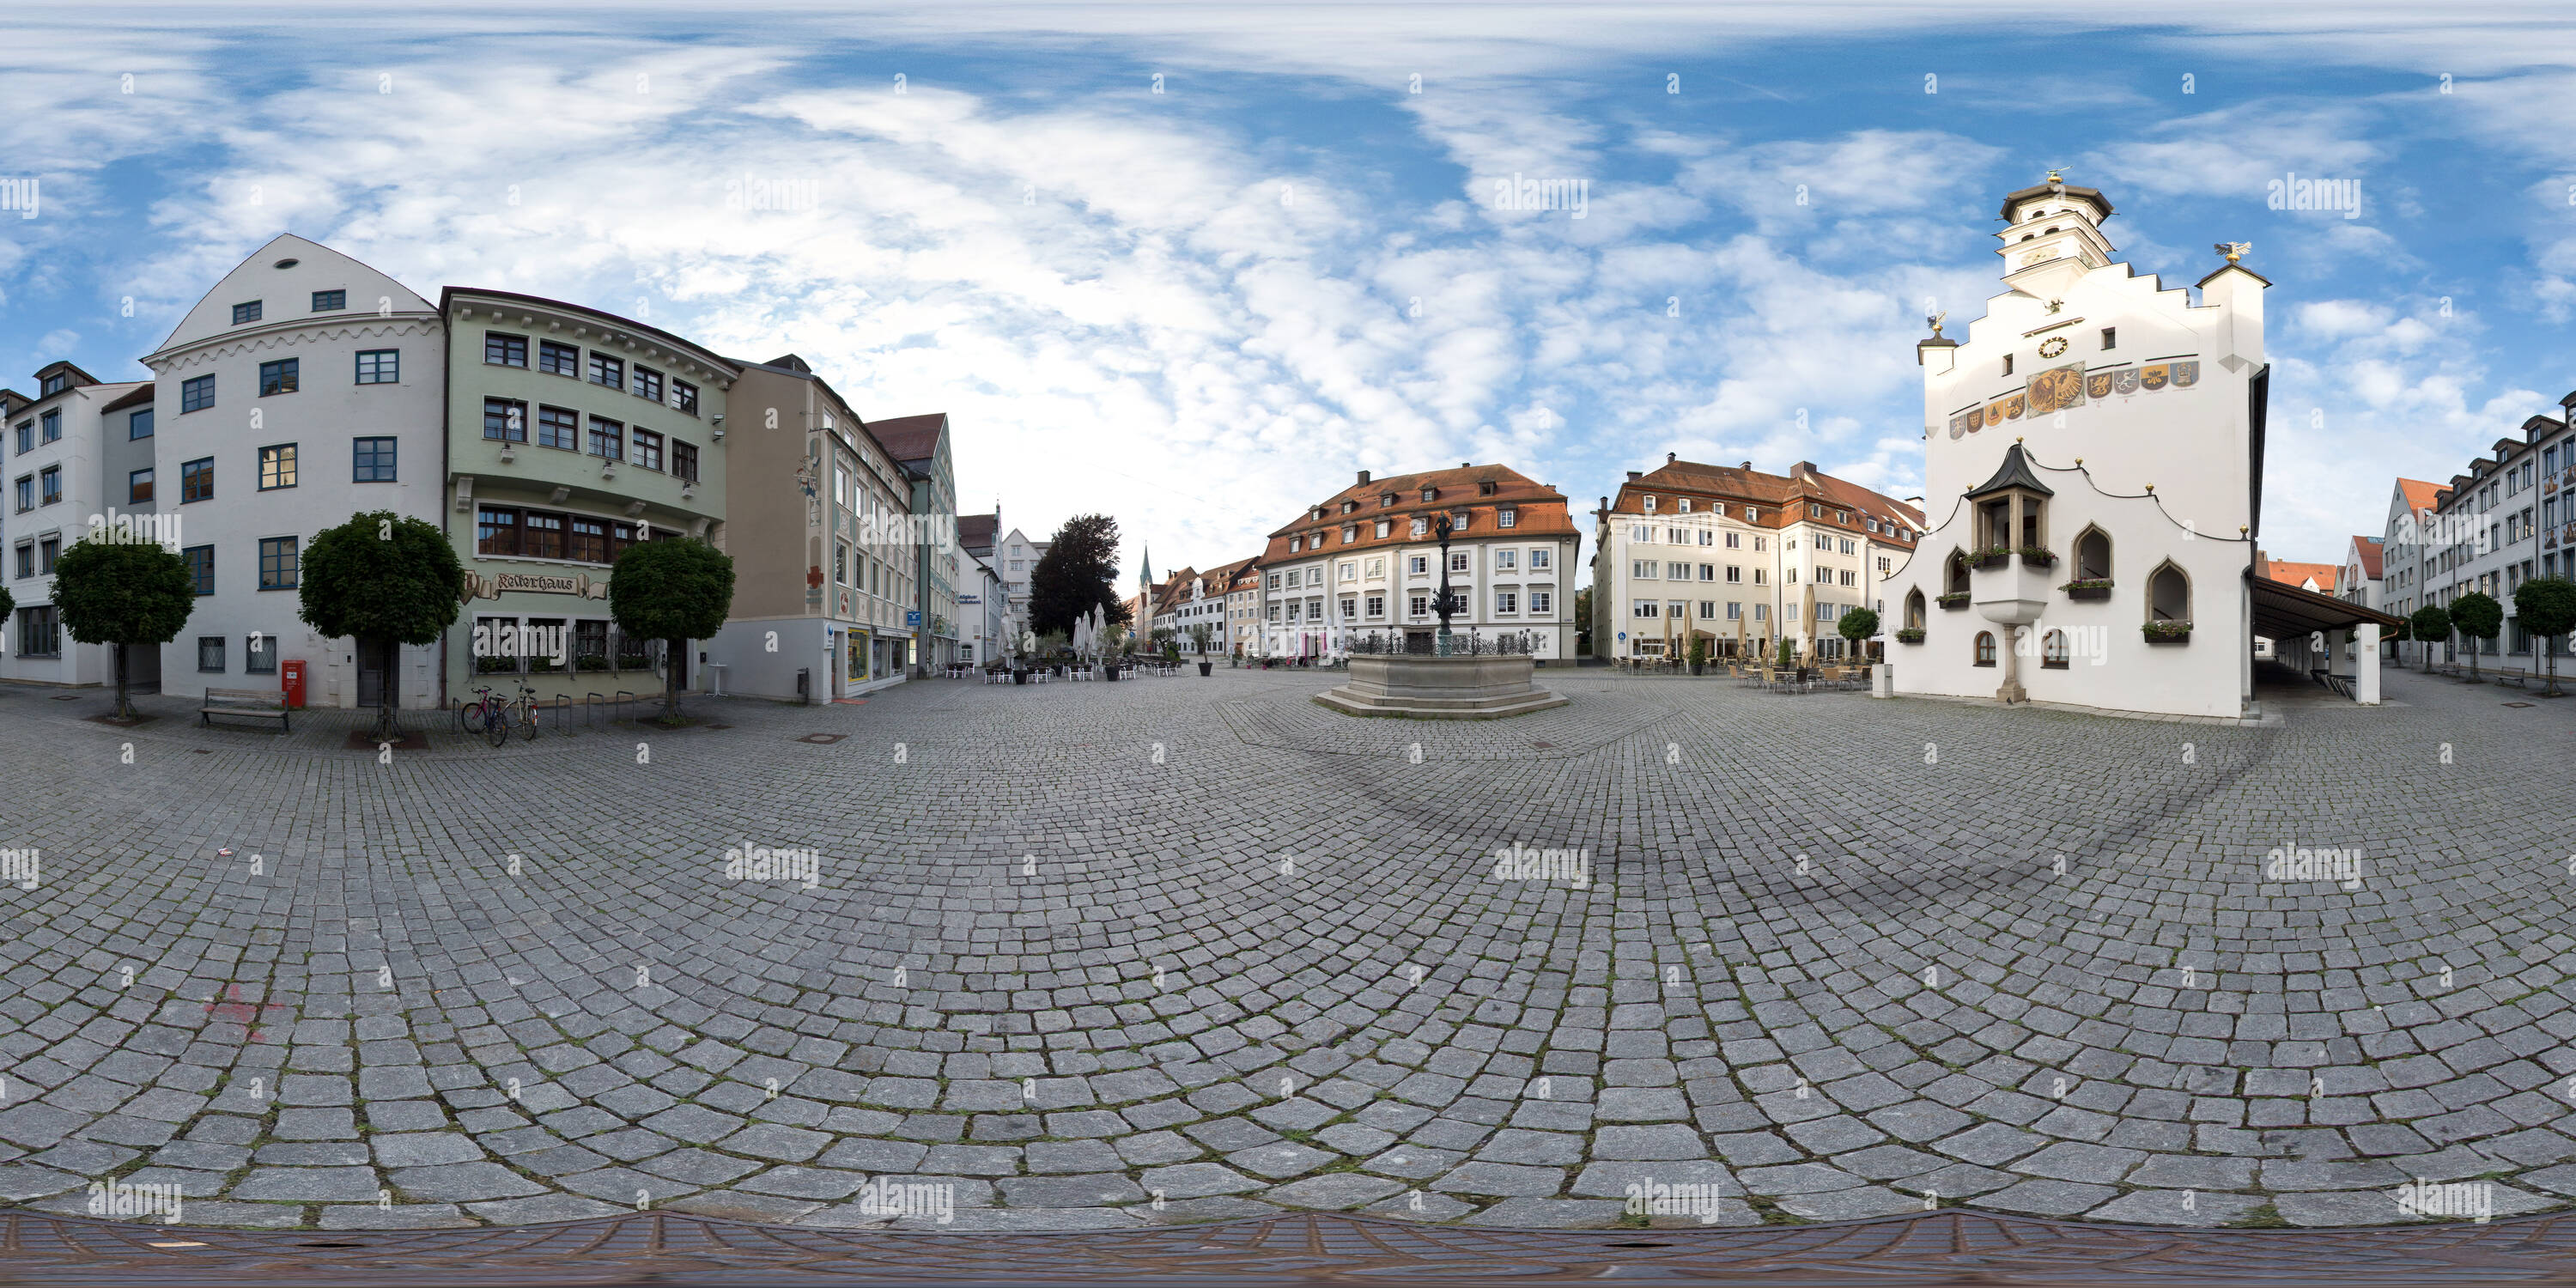 360 degree panoramic view of City Hall, Market Square, Kempten 2017-07